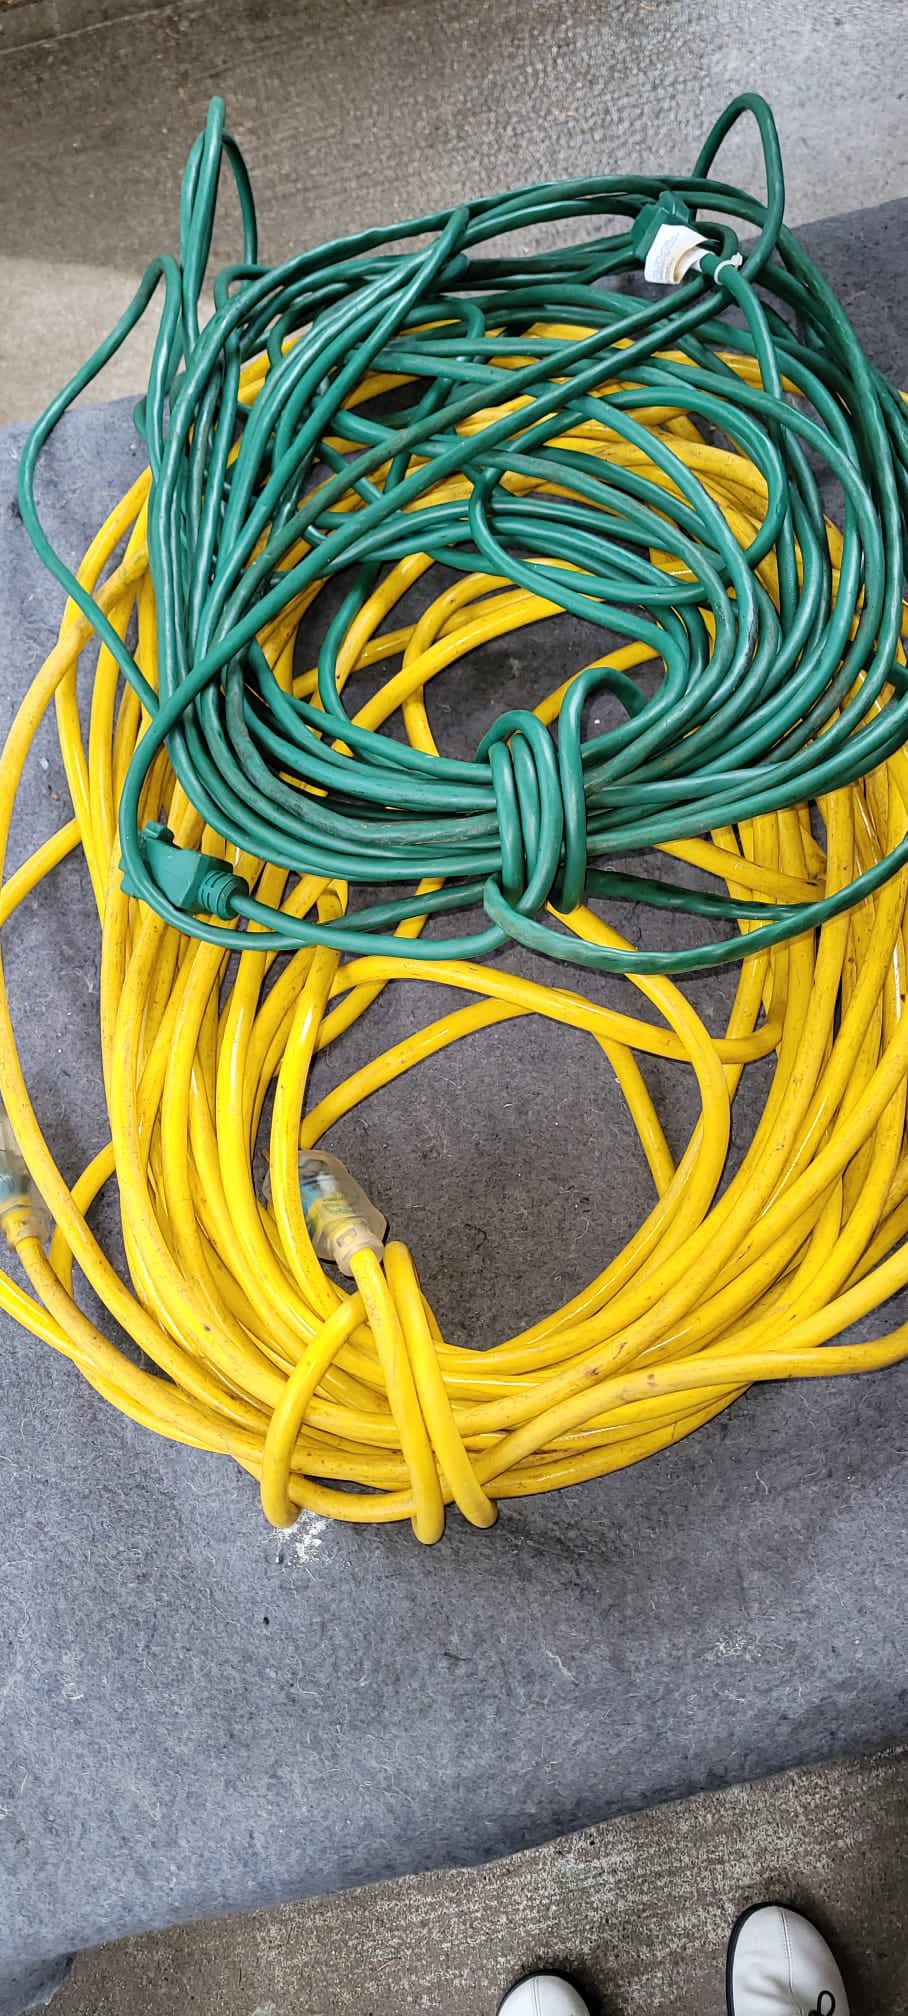 Extension Cords (2)